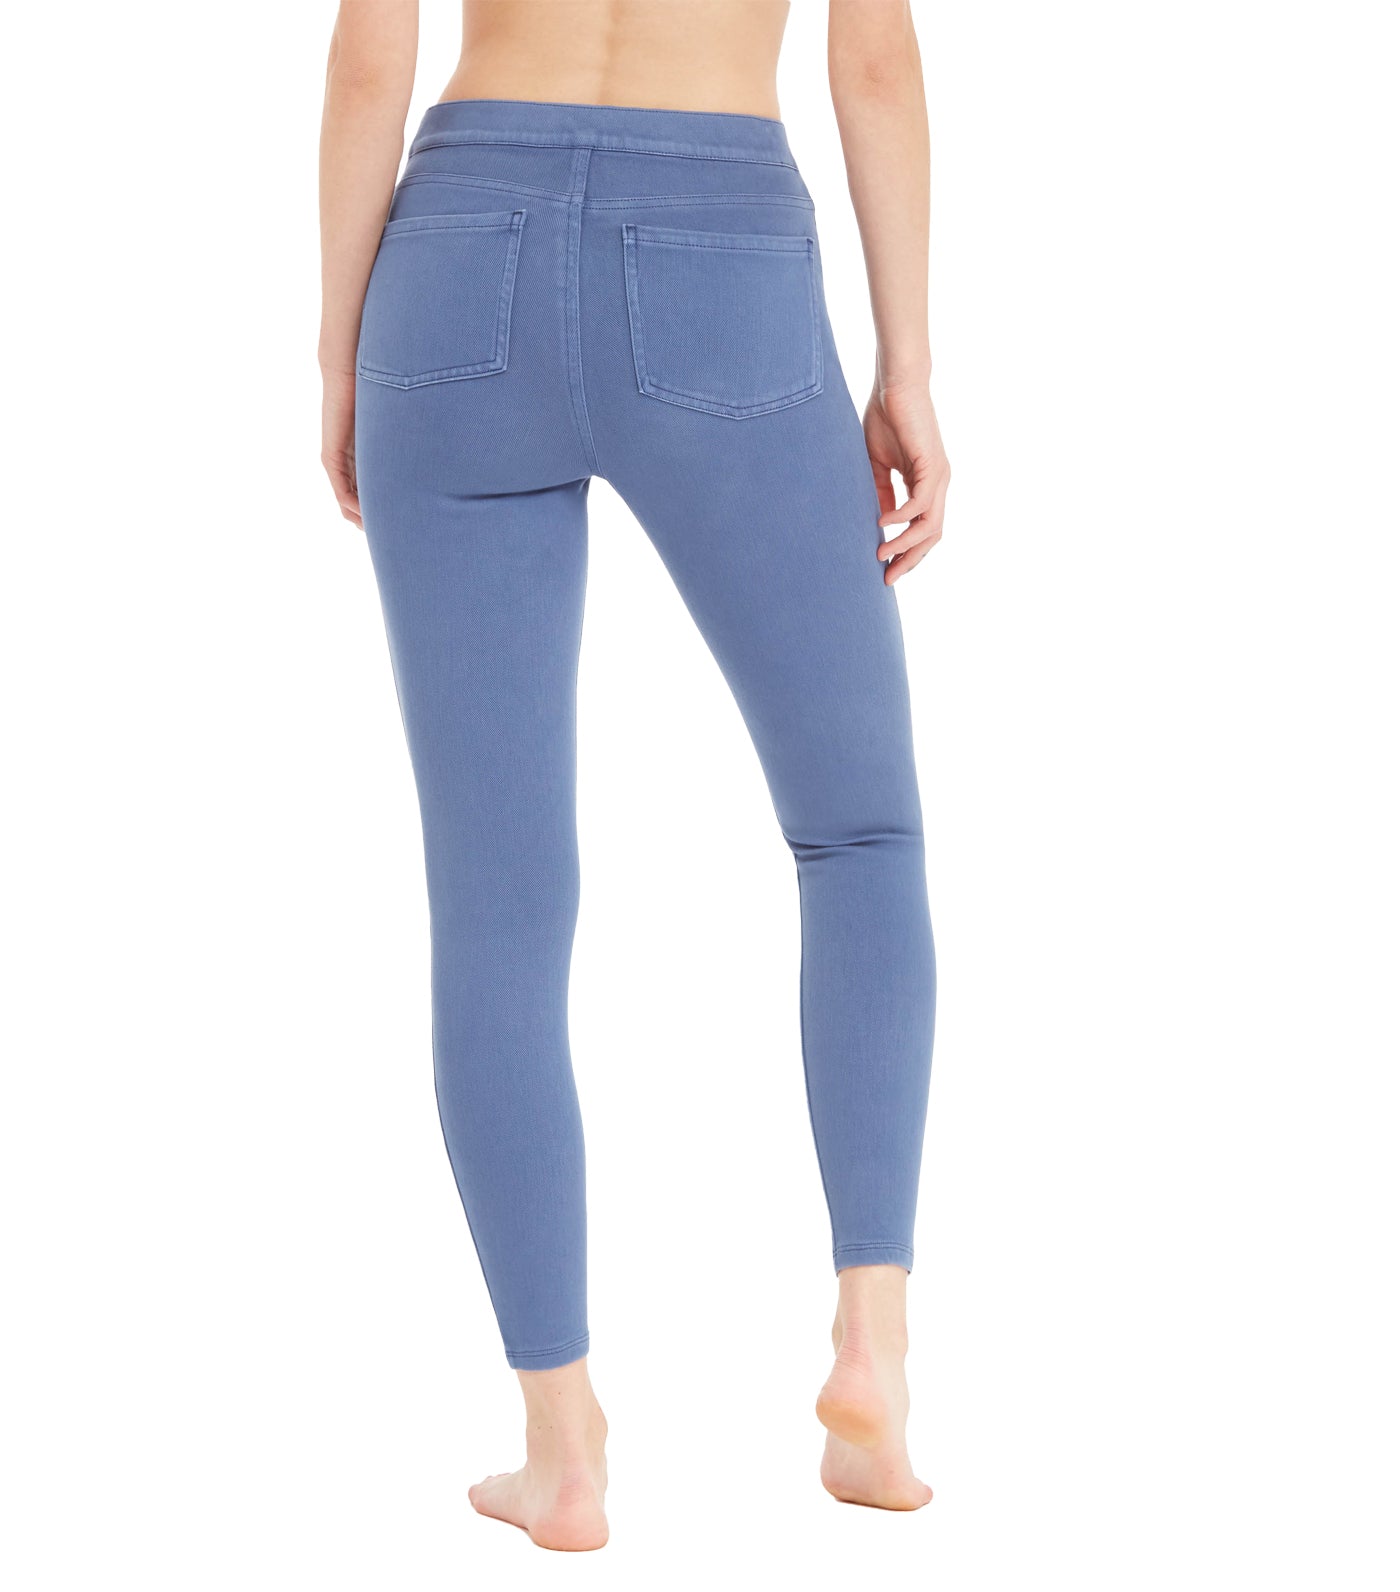 Buy SPANX® Medium Control Jeans Ish Shaping Skinny Jeggings from